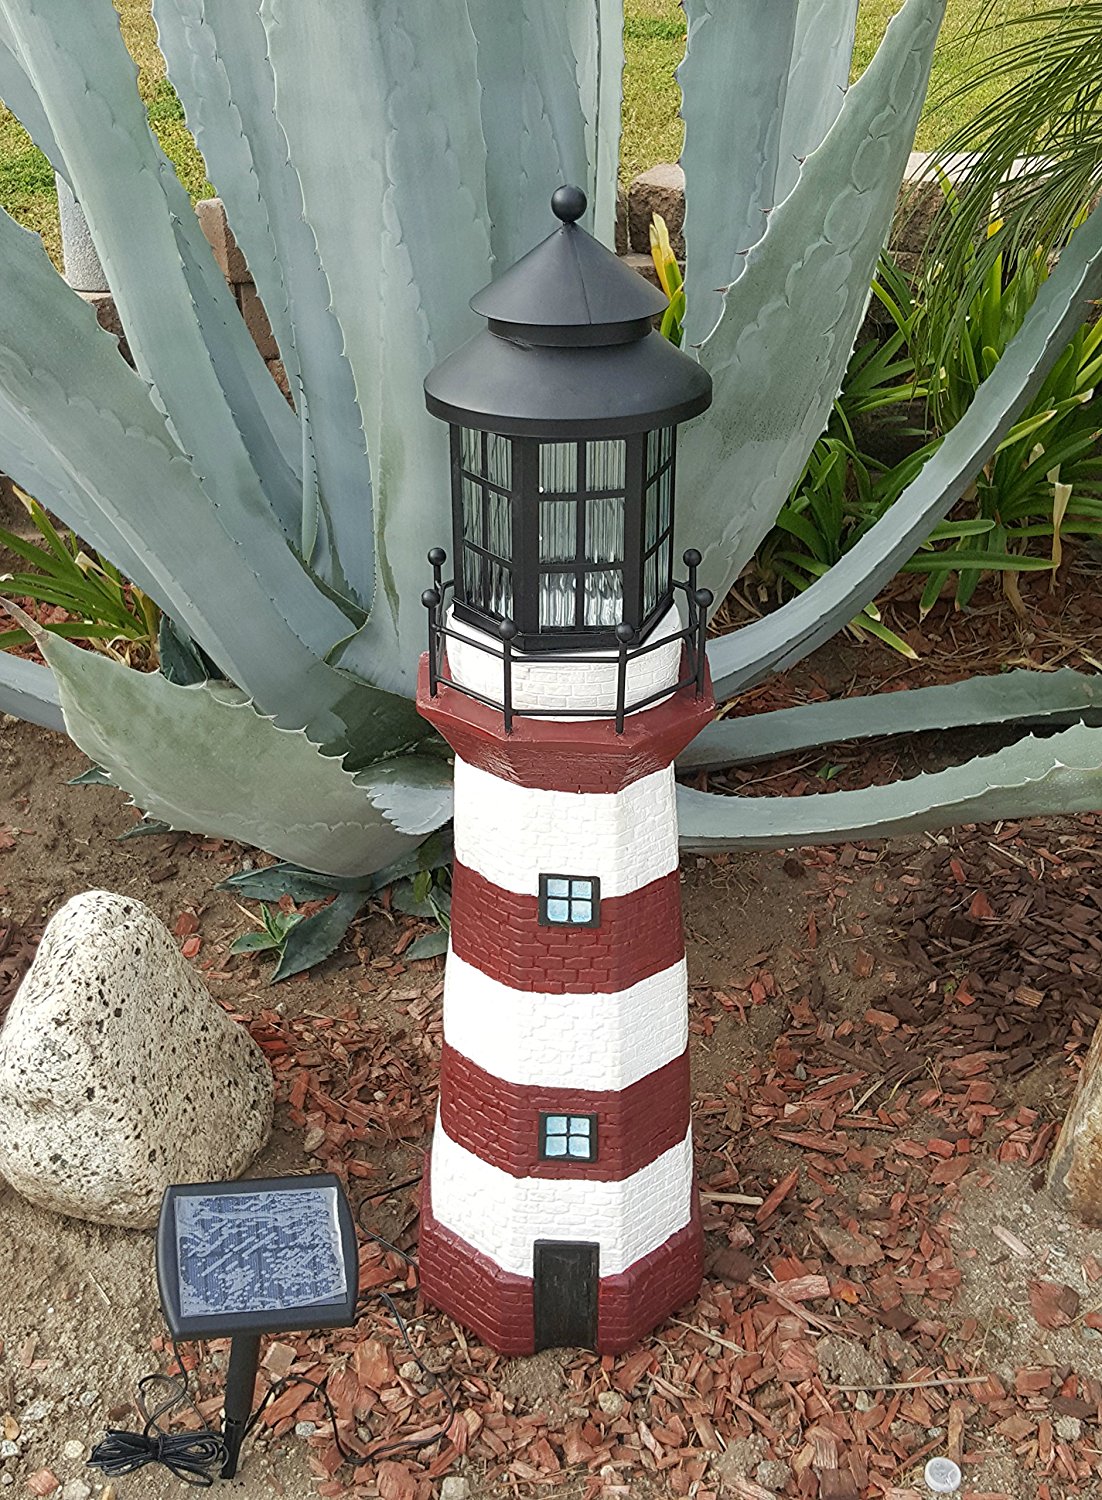 Solar Powered Lighthouse Lawn Ornaments | OutsideModern